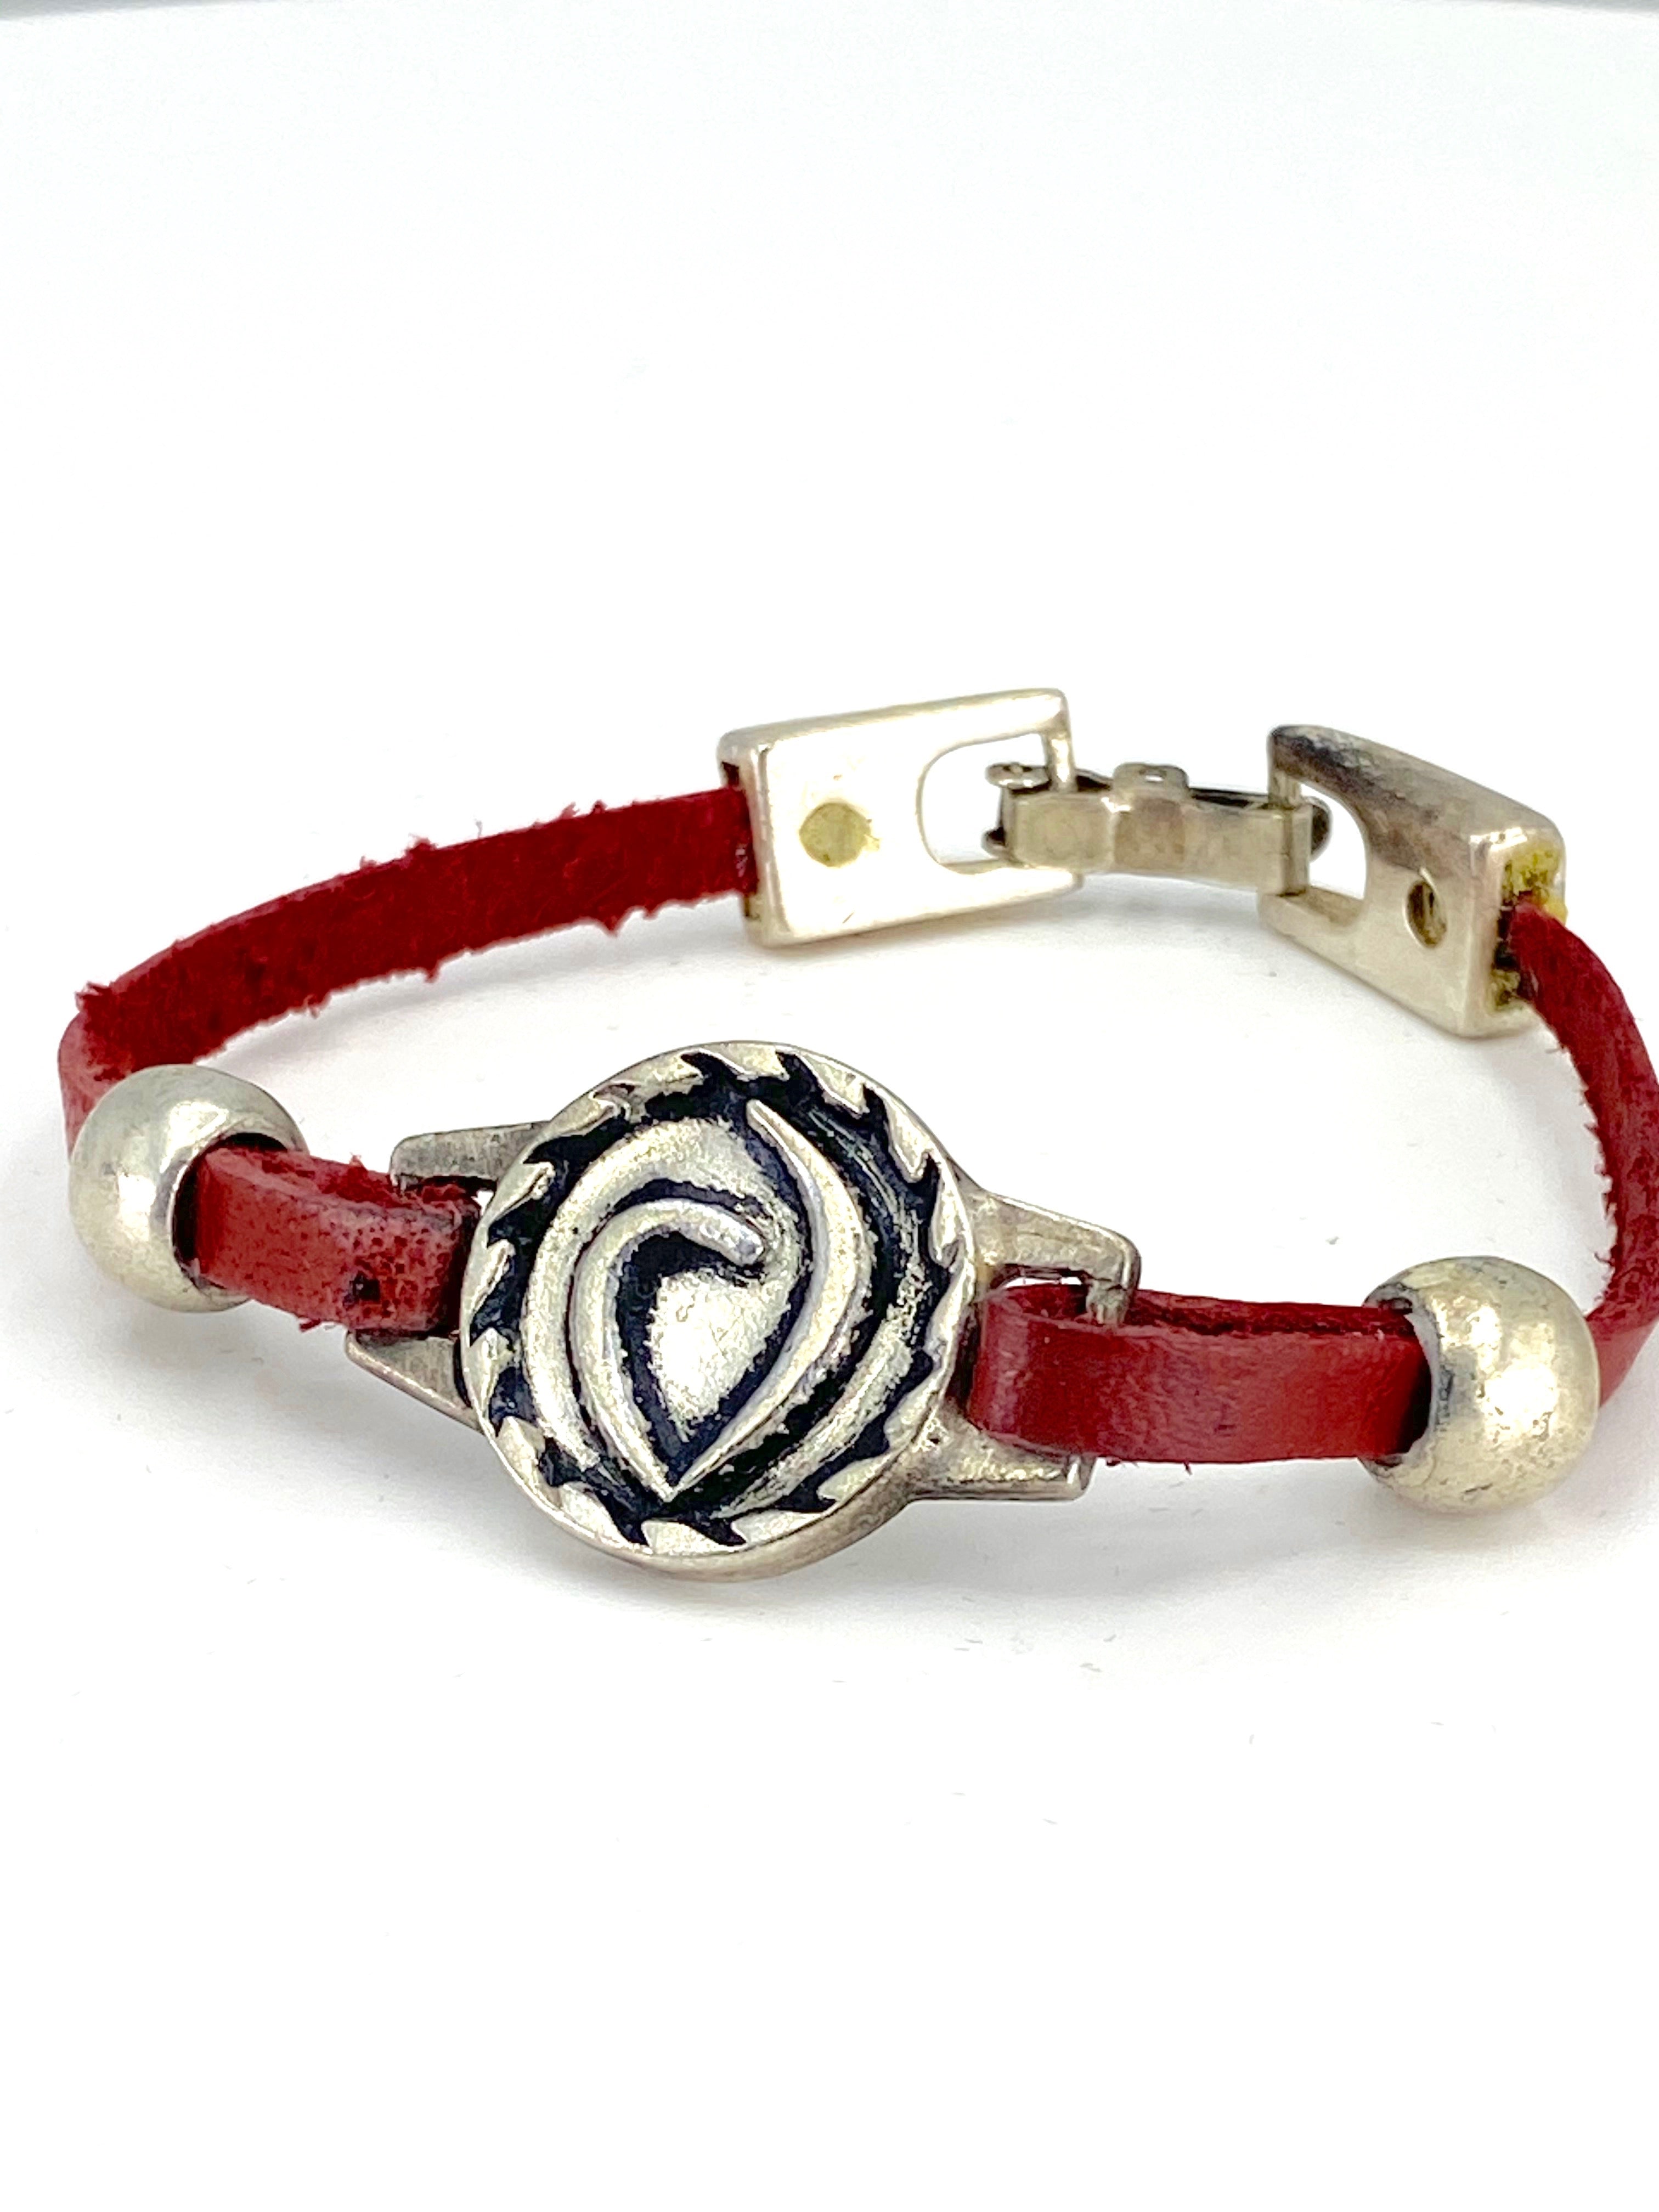 The Heart Vintage Bracelet Handmade jewelry with Genuine Leather Strap by Graciela's Collection